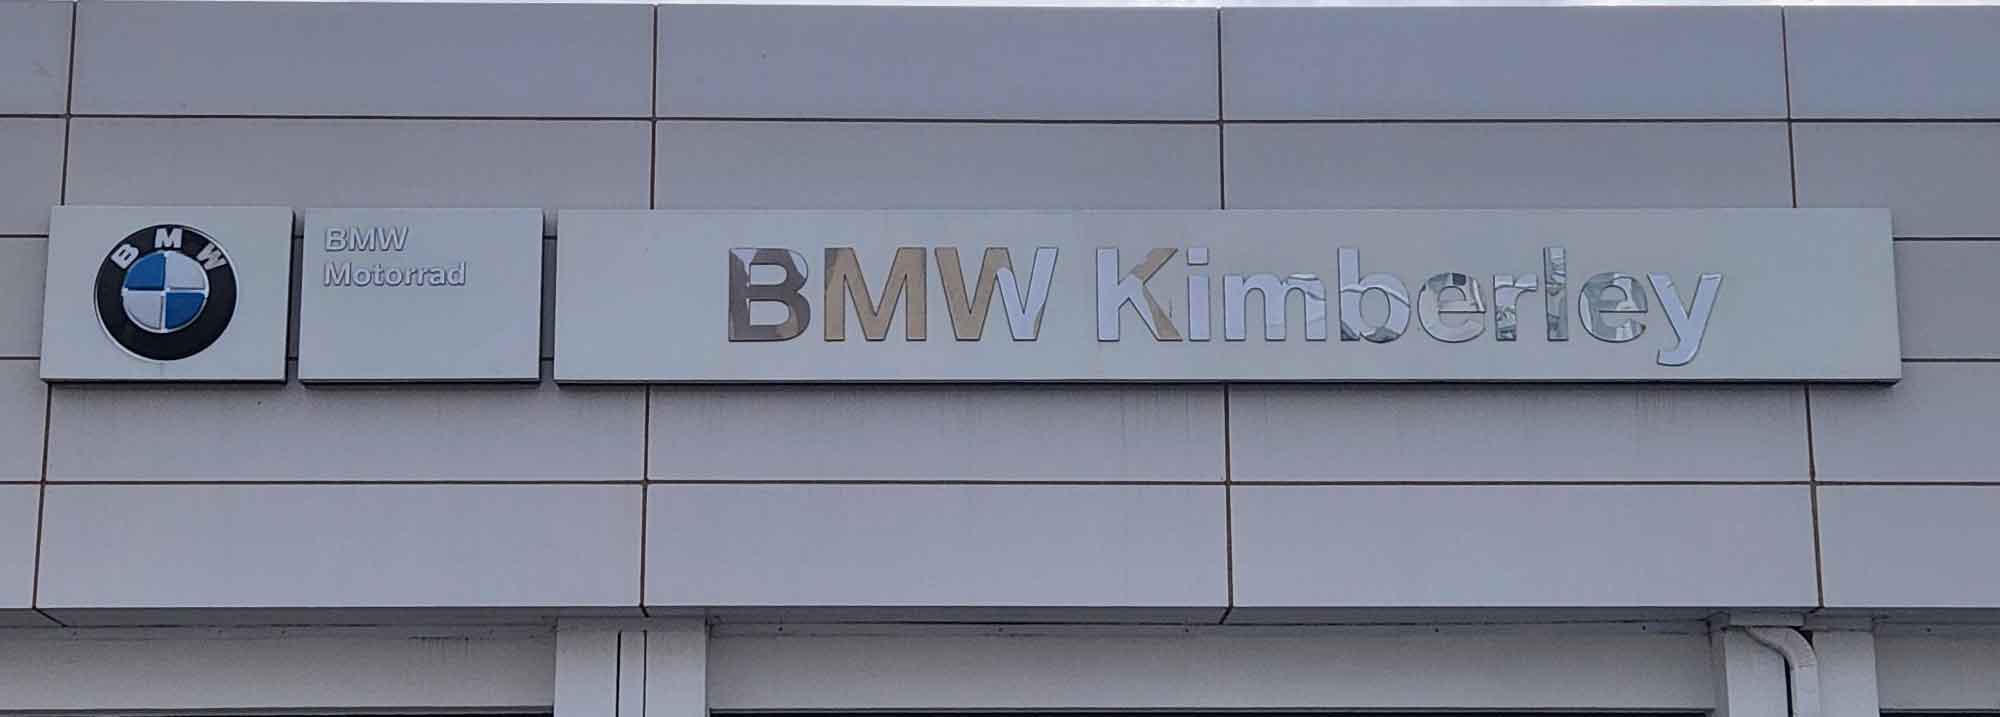 Catering for the Northern Cape’s BMW needs video-banner